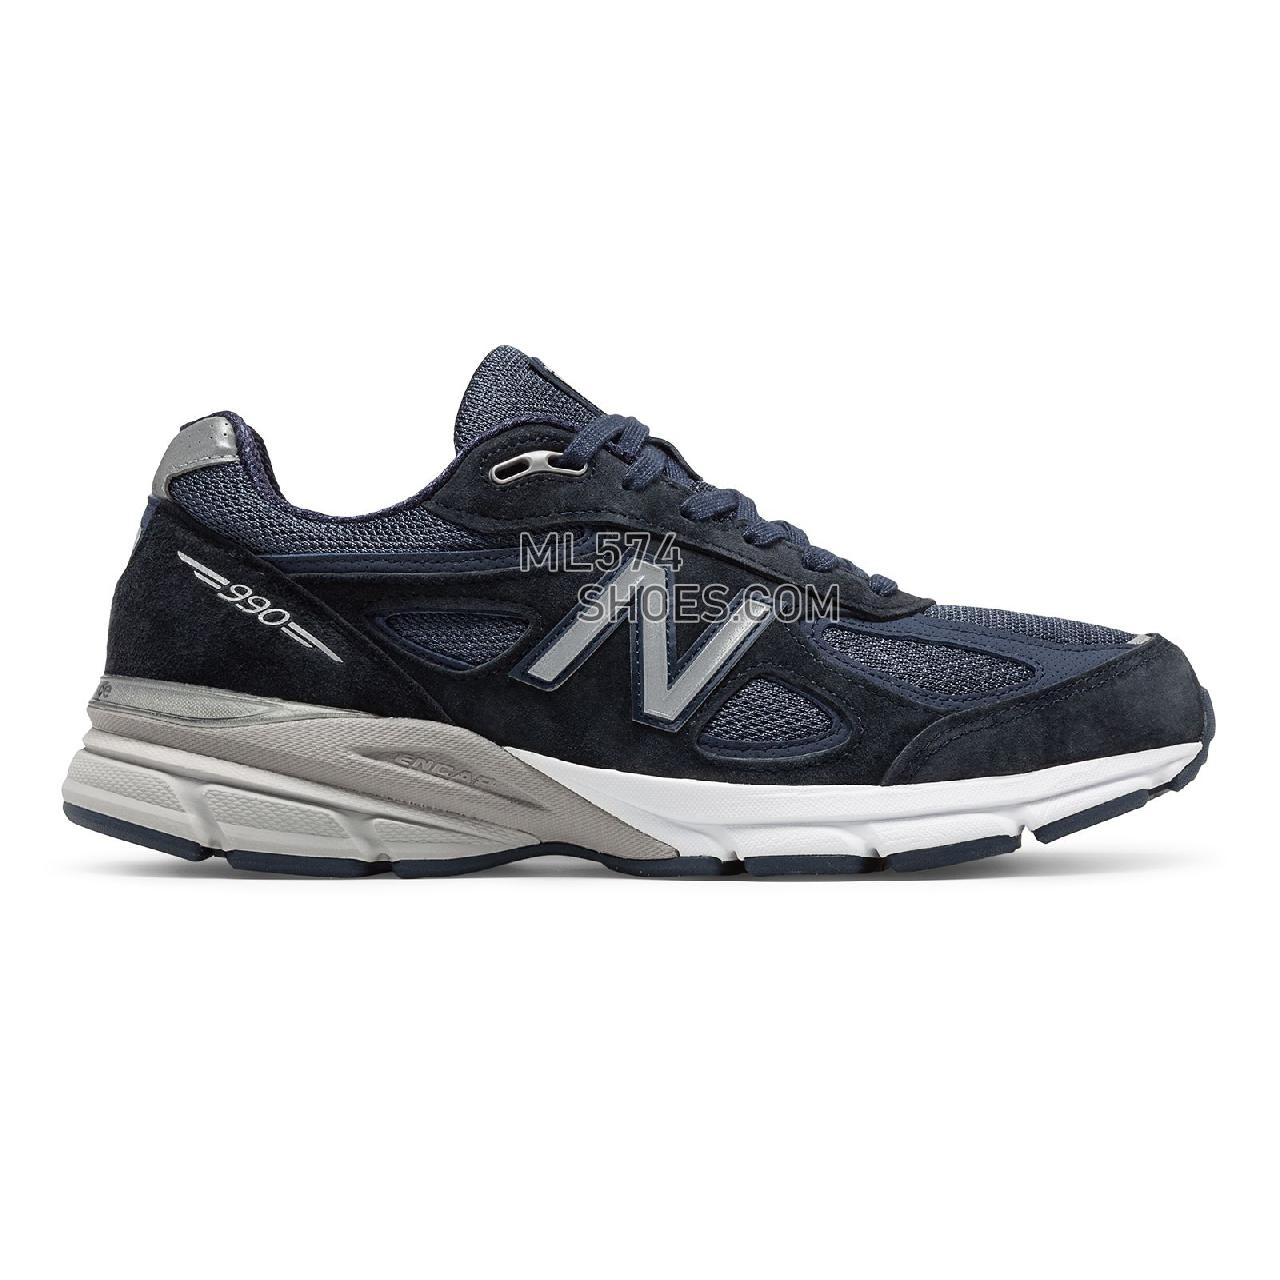 New Balance Mens 990v4 Made in US - Men's 990 - Running Navy with Silver - M990NV4